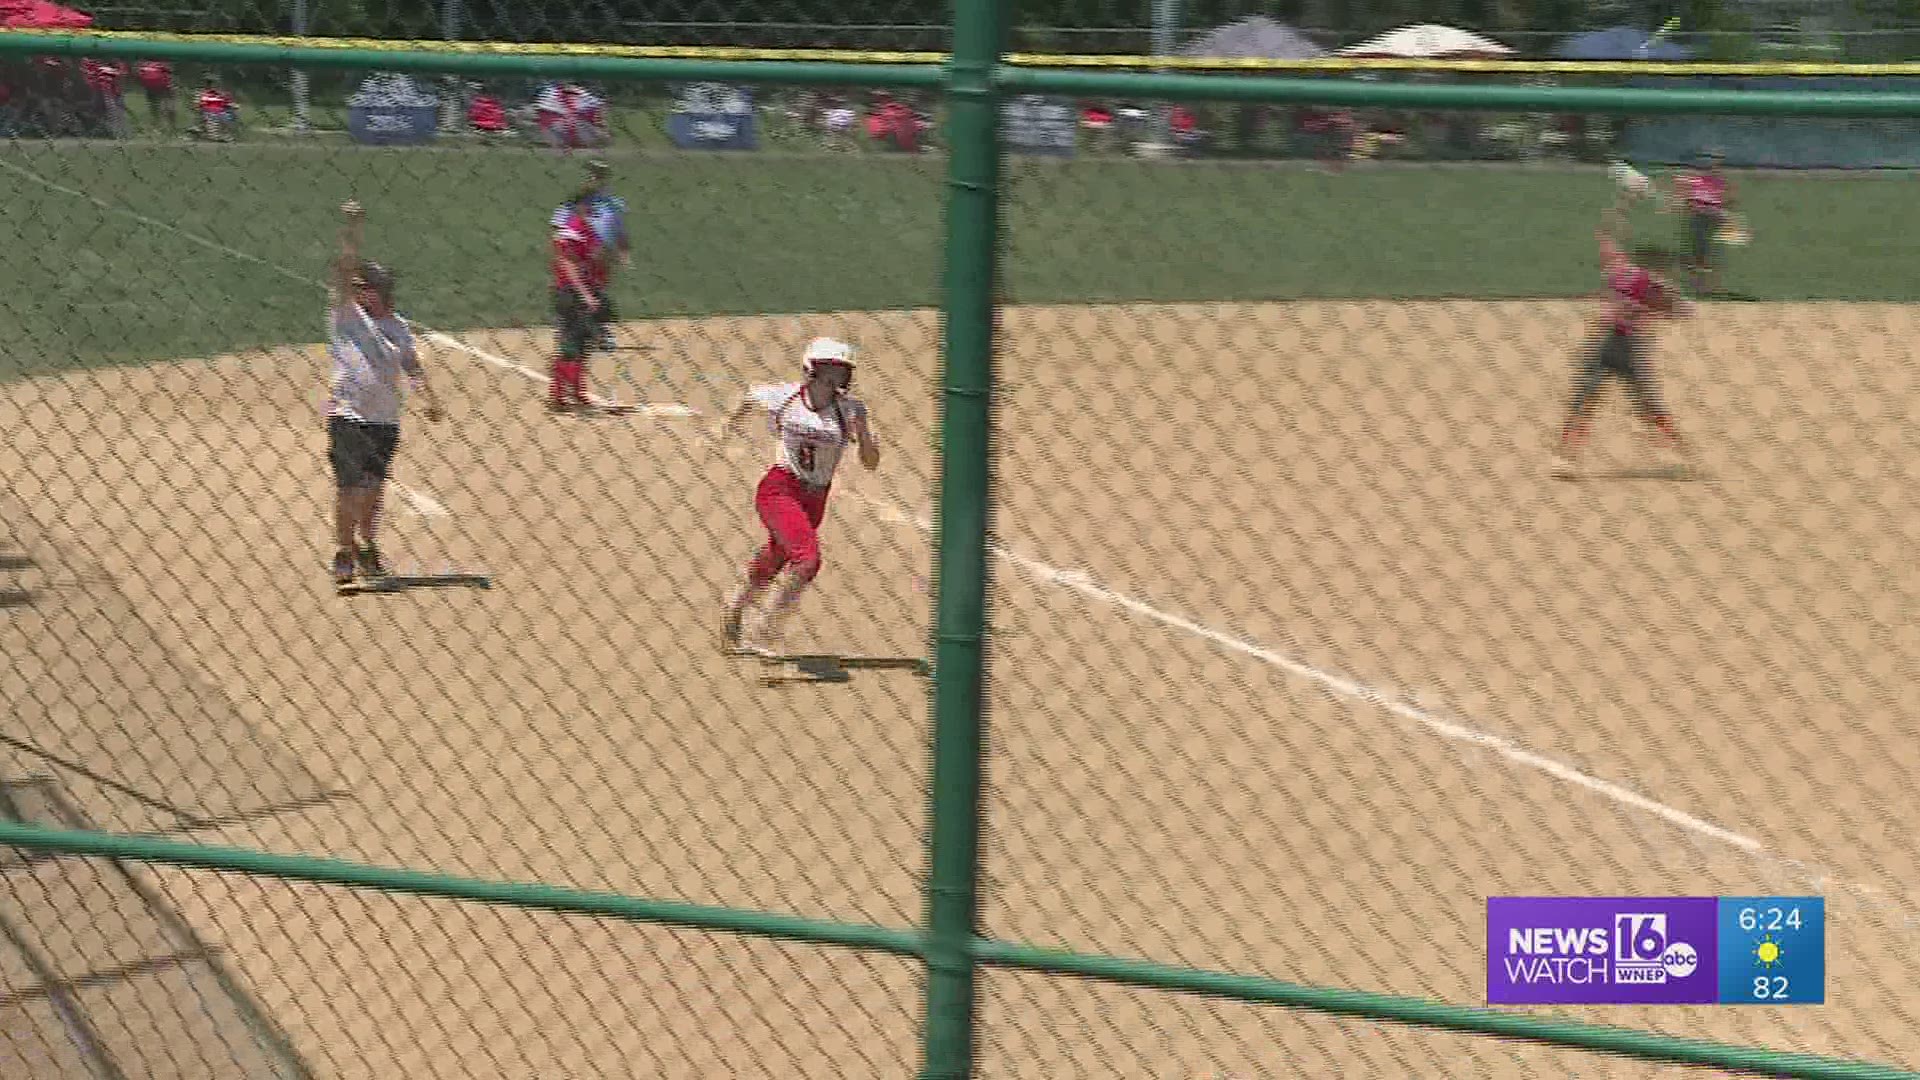 Tri-Valley rallied in the 7th to clip Montgomery 4-3 in the State Softball playoffs.